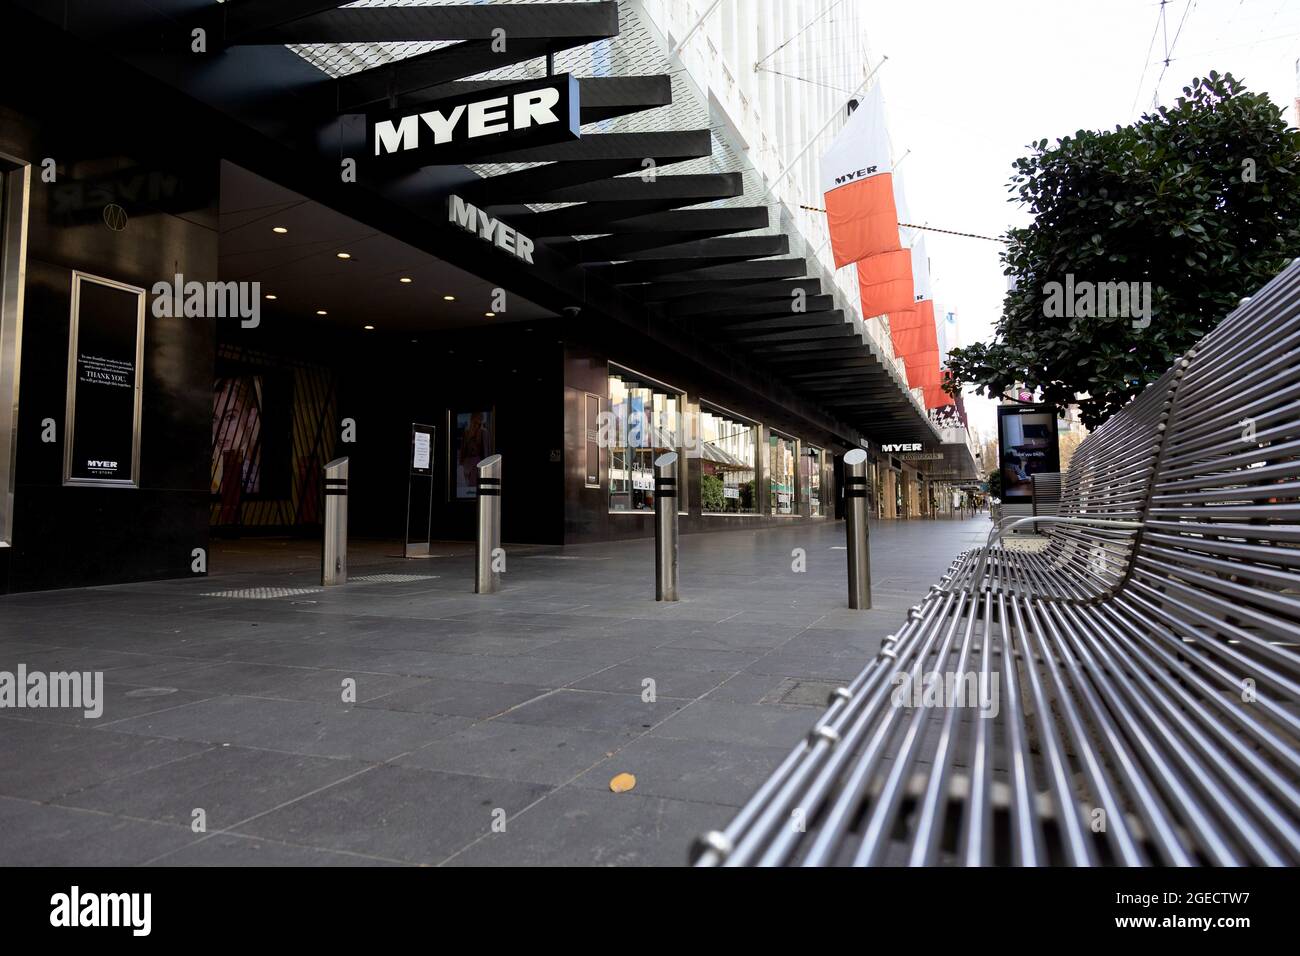 Melbourne, Australia, 9 September, 2020. A view of Bourke Street Myer as foot traffic in the mall is reduced to zero during COVID-19 in Melbourne, Australia. Victoria records a further 76 cases of Coronavirus over the past 24 hours, an increase from yesterday along with 11 deaths. This comes amid news that AstraZeneca pauses vaccine study. Credit: Dave Hewison/Speed Media/Alamy Live News Stock Photo